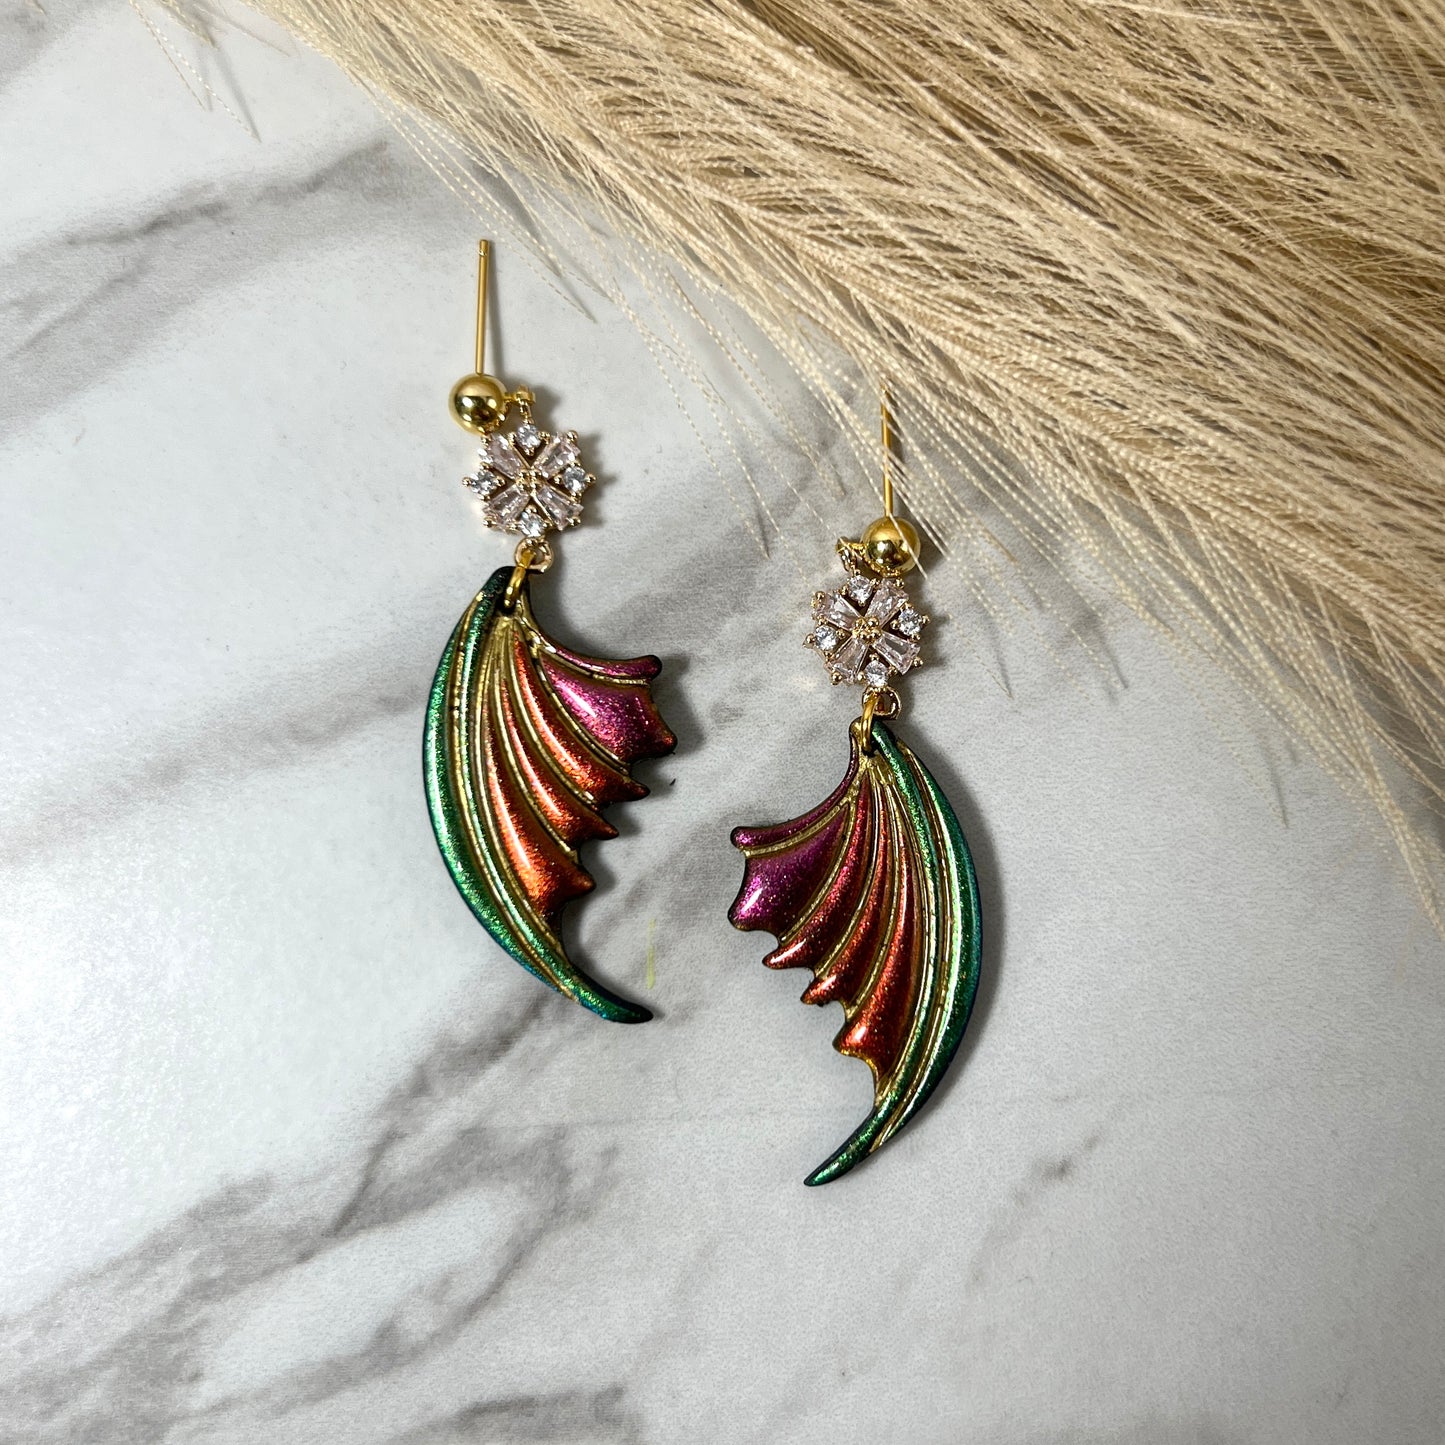 Mica Shimmer Bat wing Polymer Clay Earrings